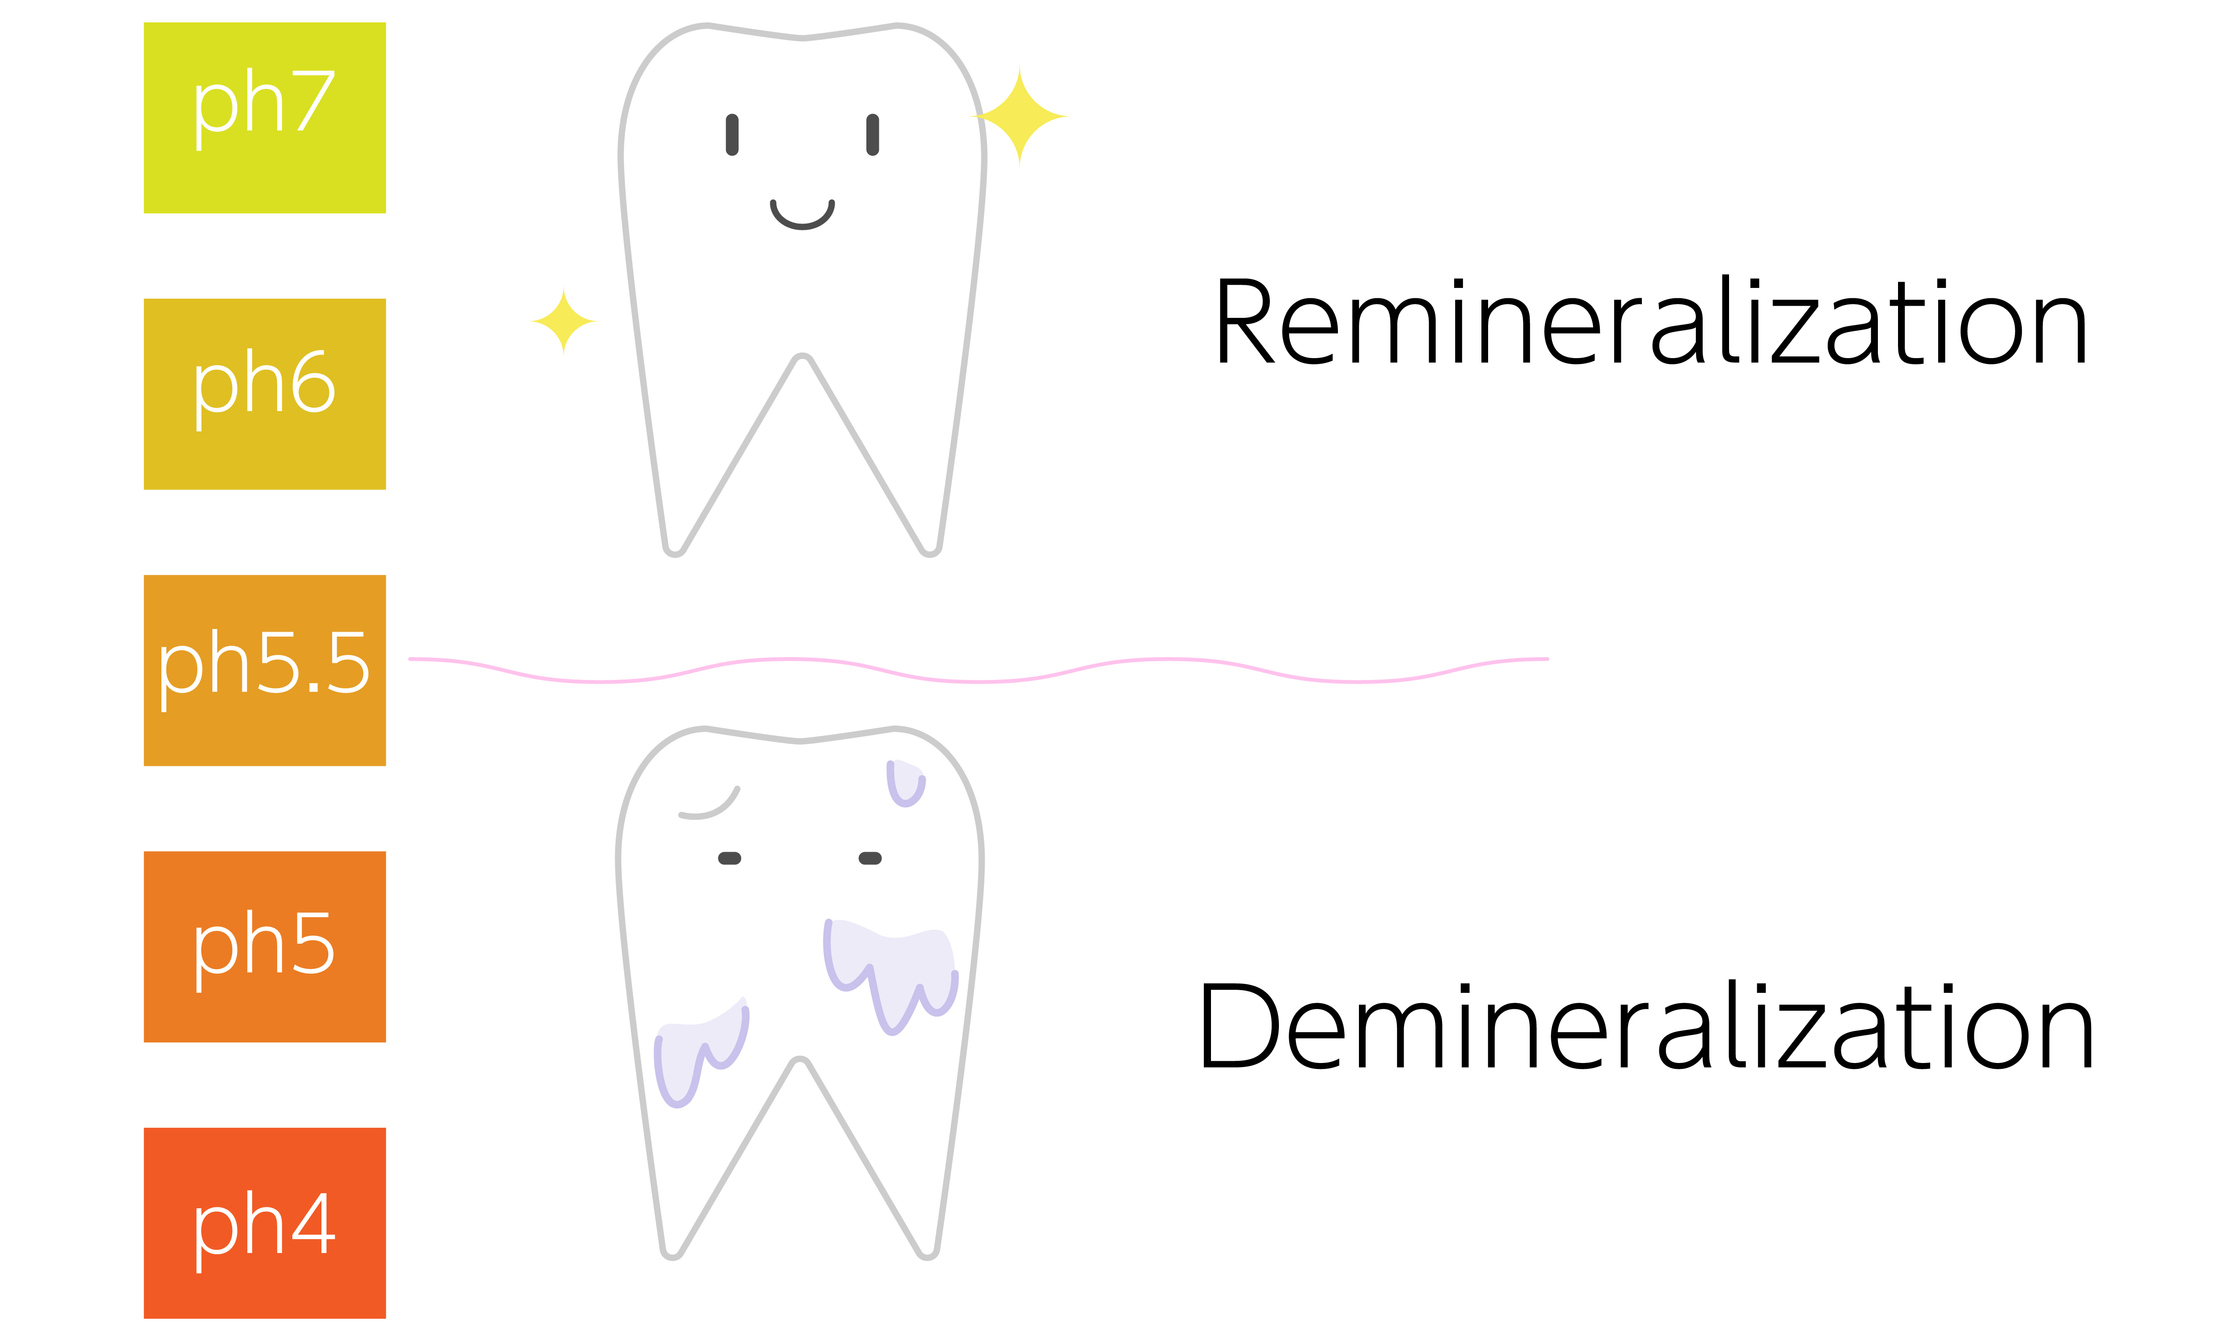 The critical pH value of saliva is considered to be 5.5. At this value, the process of demineralization of tooth enamel begins.